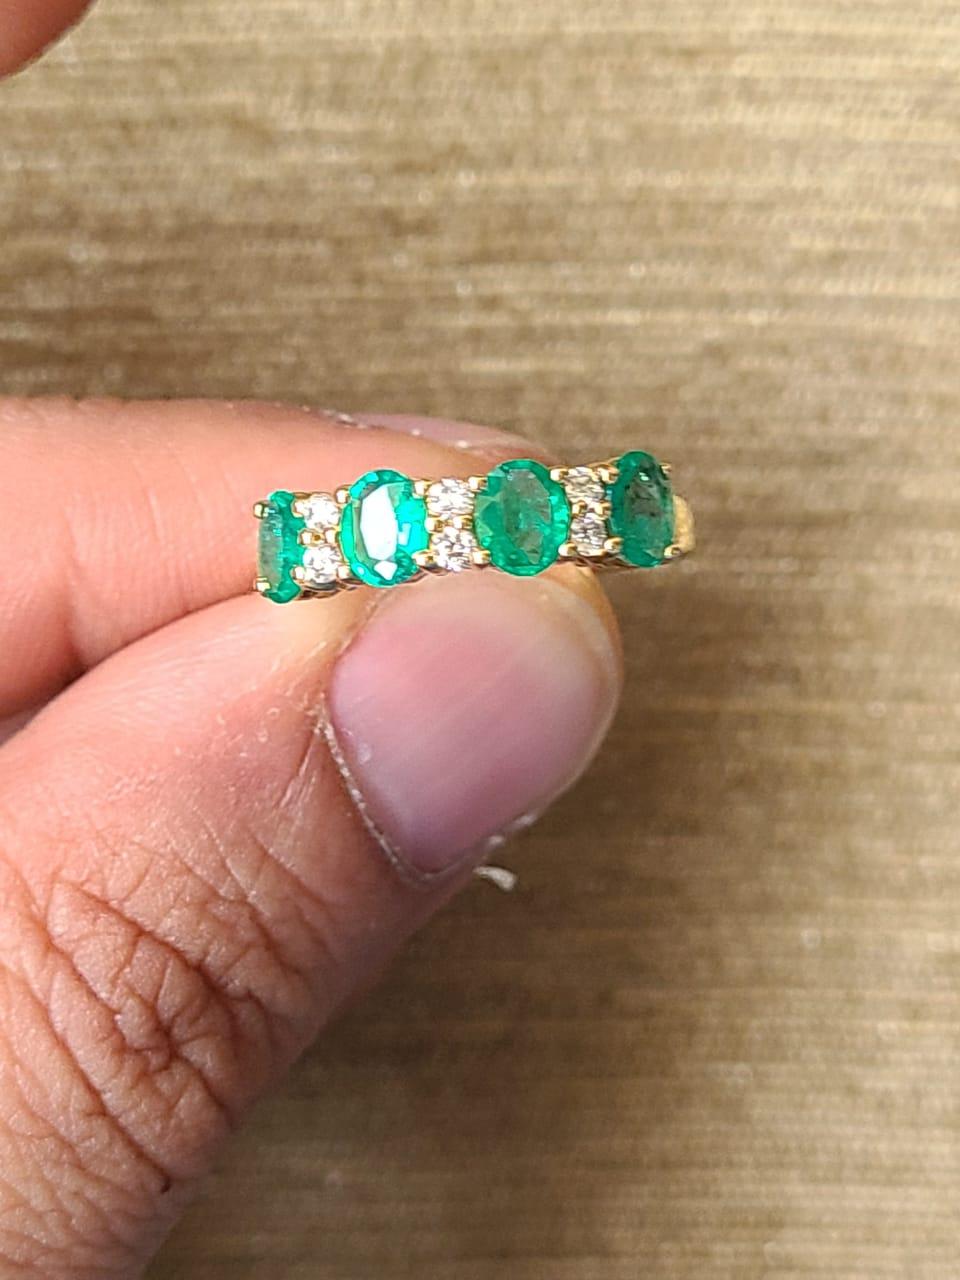 A very dainty and gorgeous Zambian Emerald Band / Wedding Ring set in 18K Yellow Gold & Diamonds. The weight of the Emeralds is 0.92 carats. The Emeralds are of Zambian origin, & is completely natural, without any treatment. The weight of the